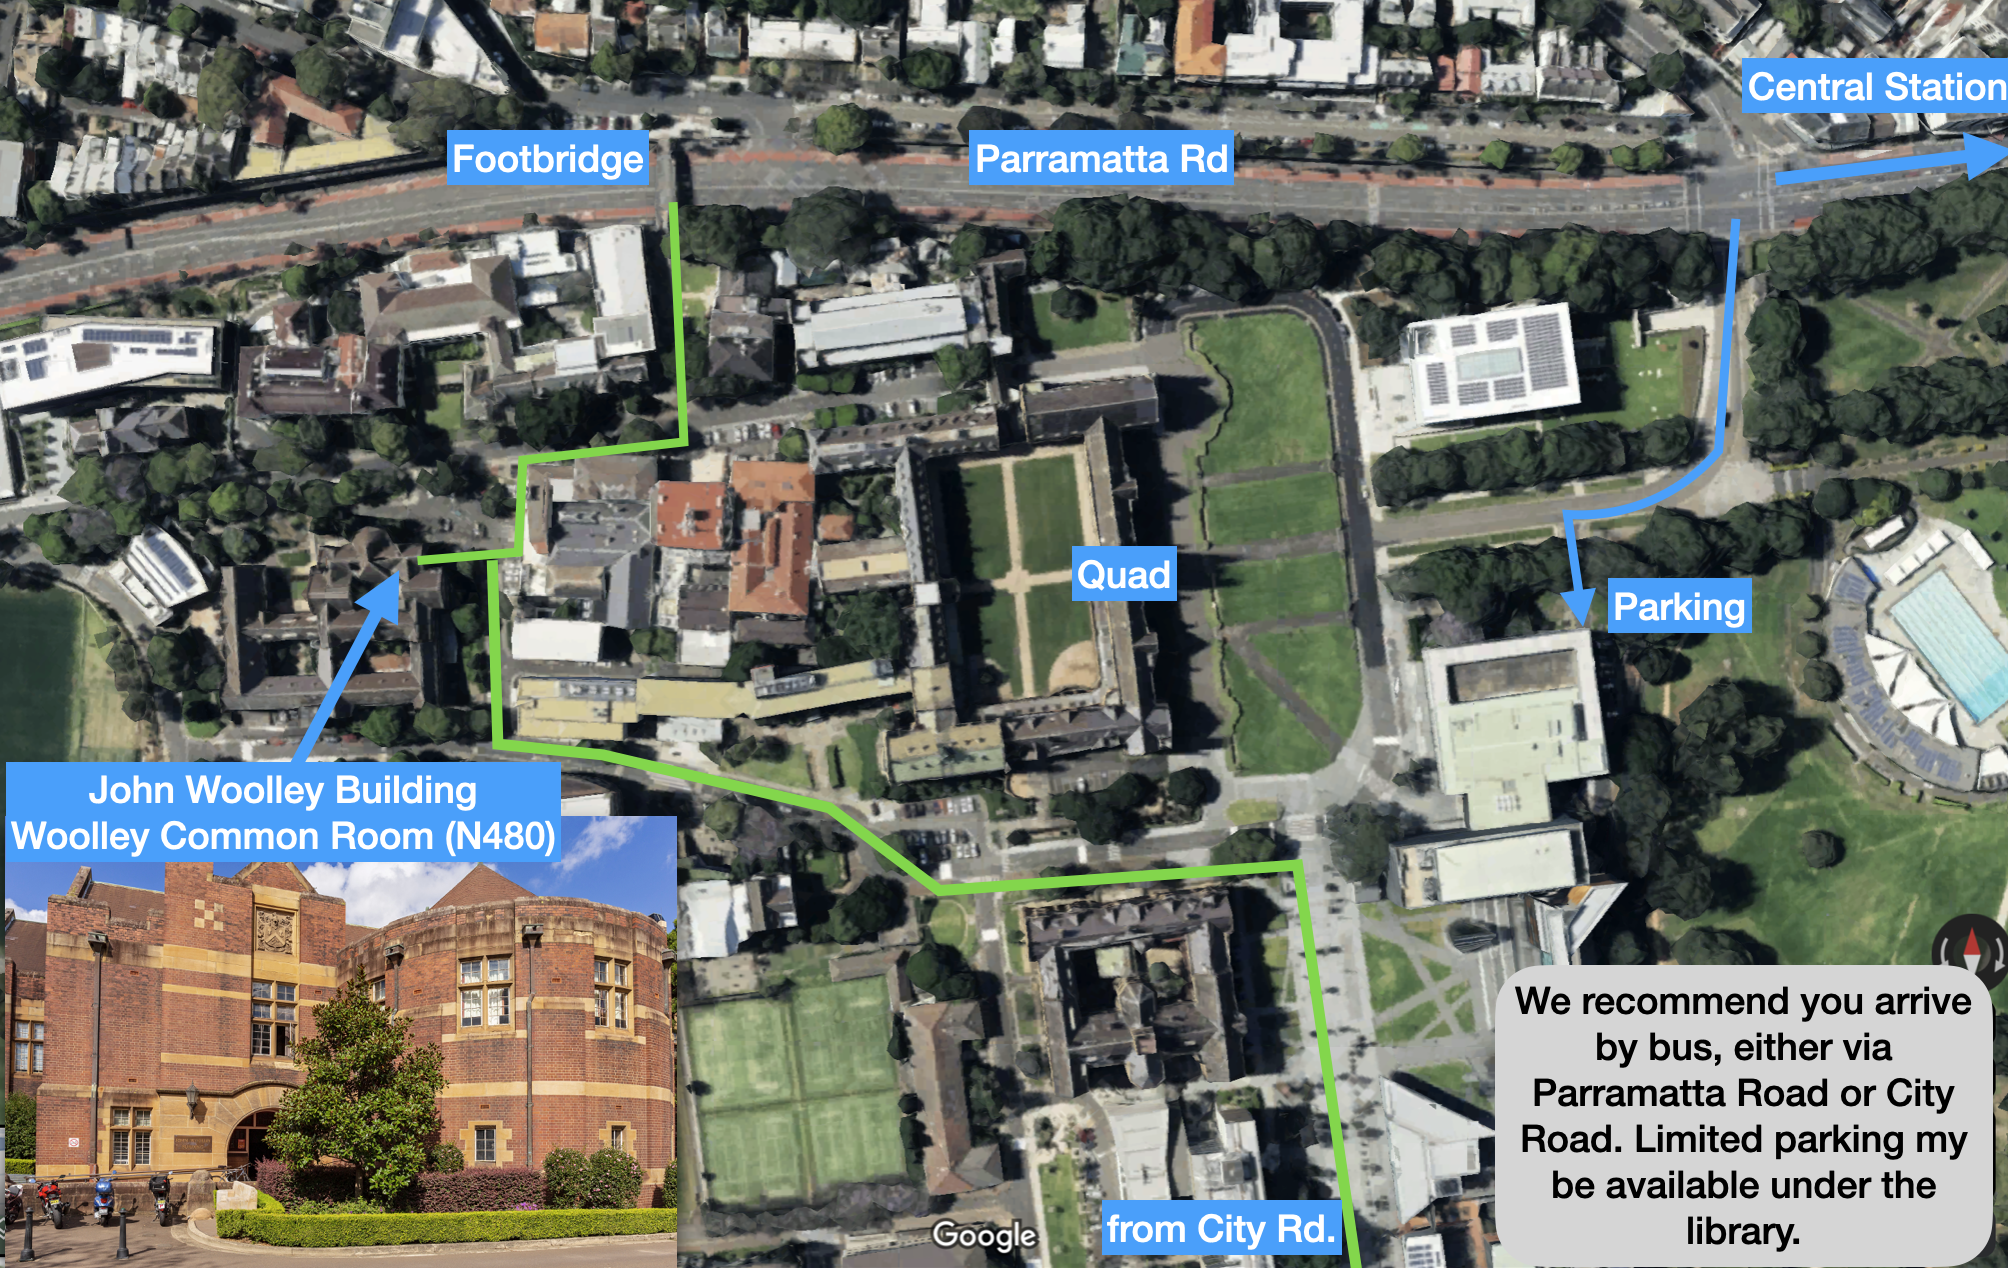 A map of the University of Sydney, showing the location of the Woolley Common Room